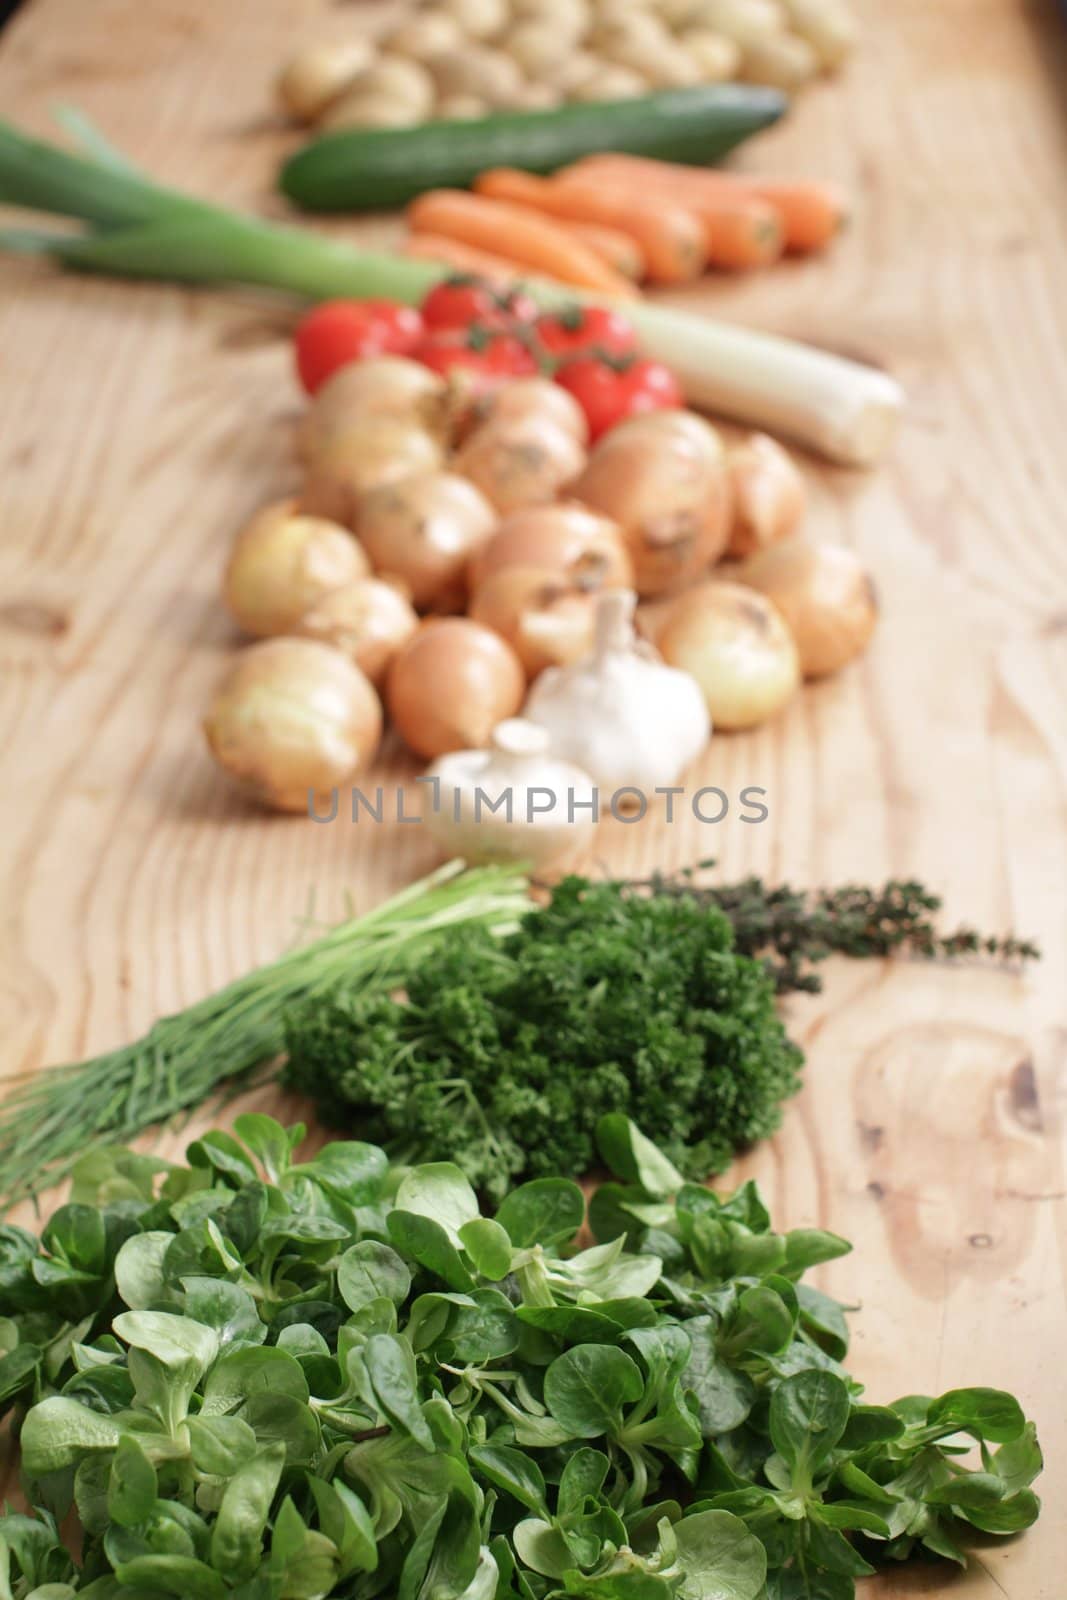 many different vegetables on a wooden table